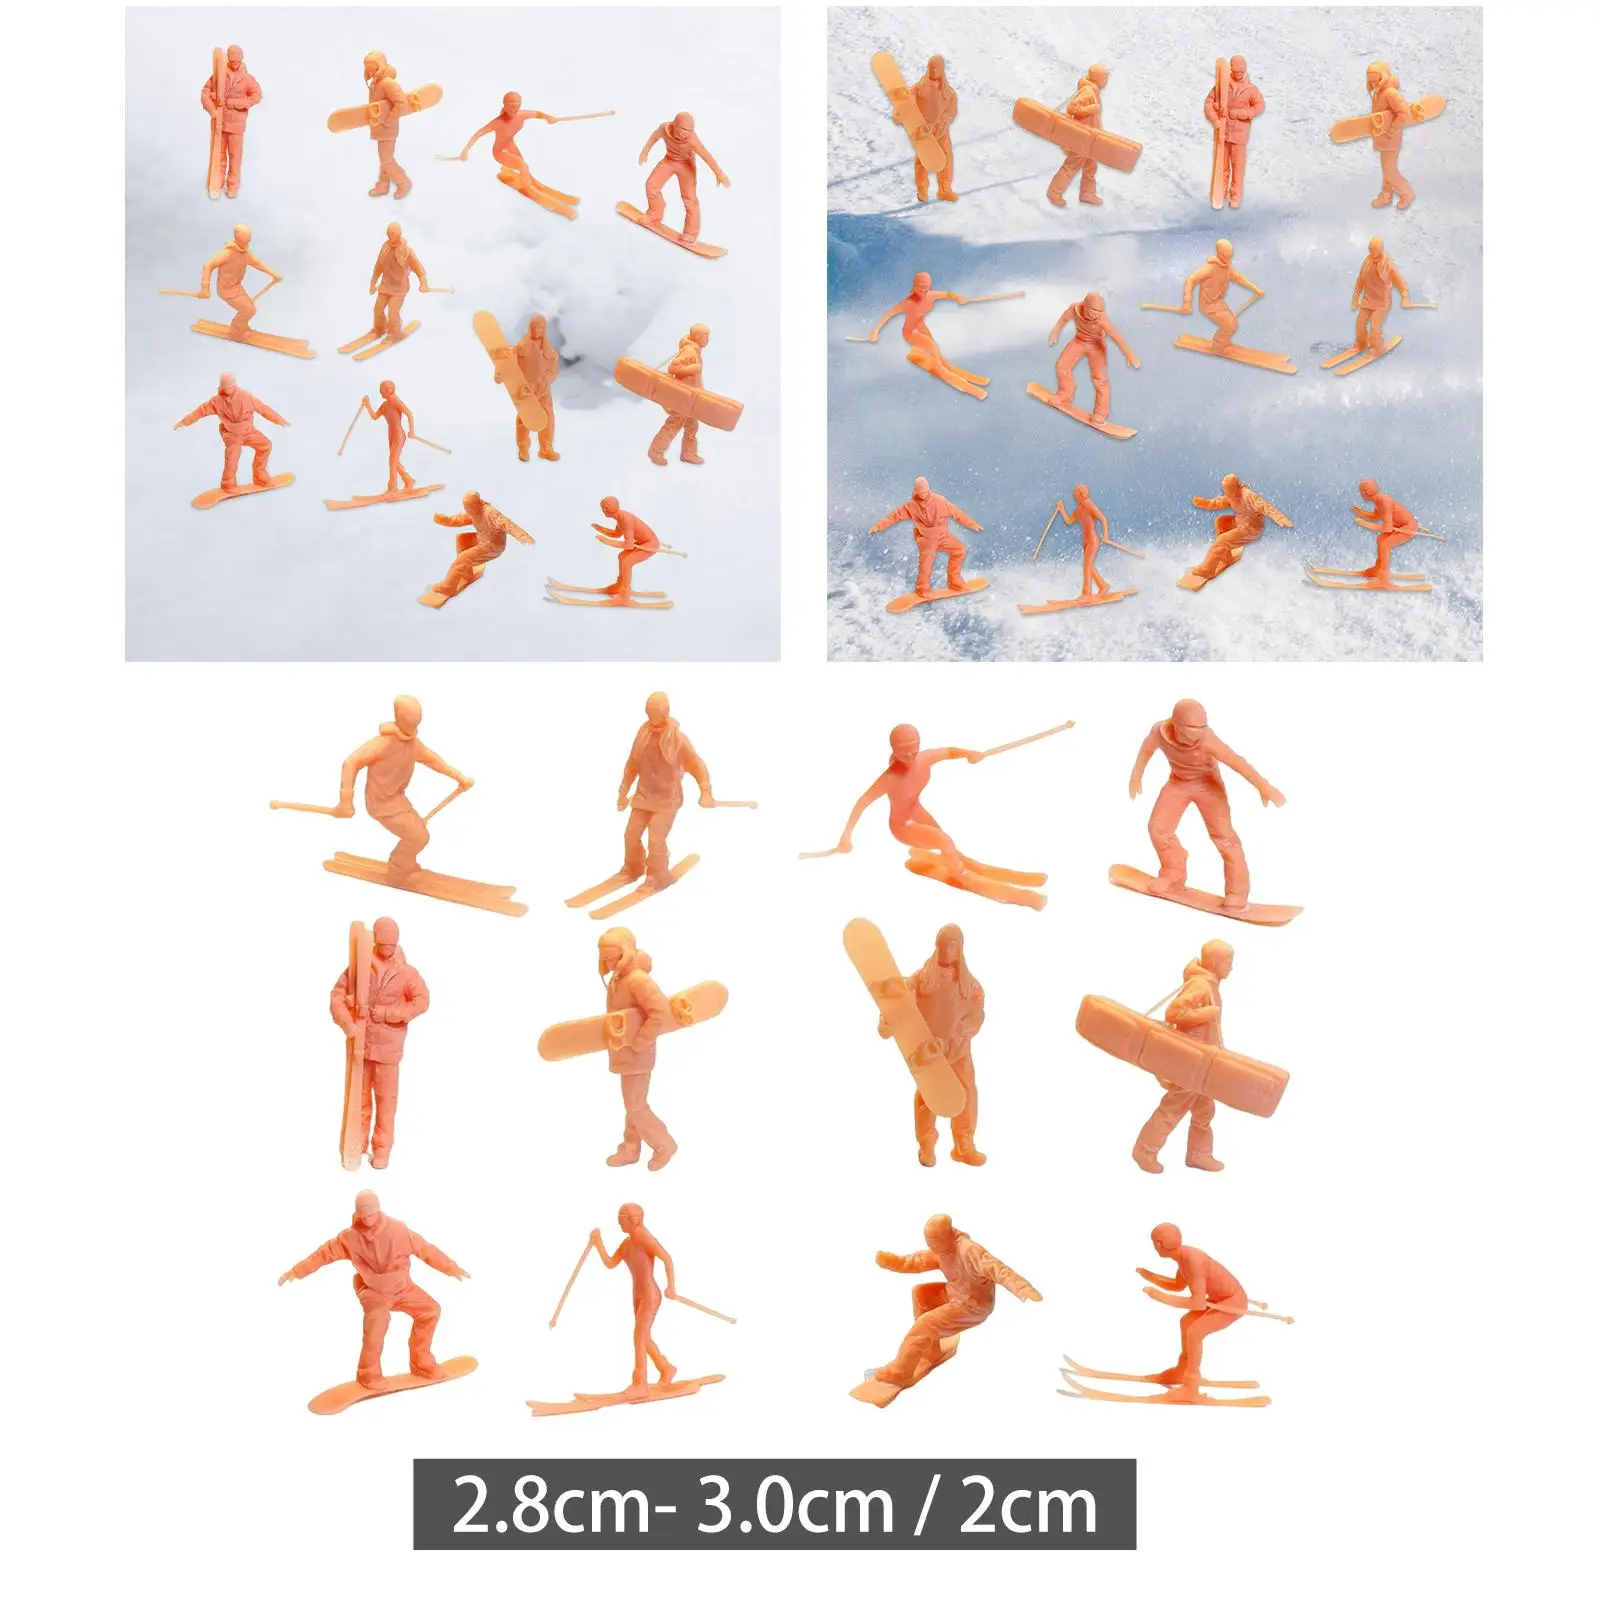 Simulation Skiing Figures Small Statue Fairy Garden Toy for DIY Miniatures Sand Table Layout Diorama Train Scenery Decoration